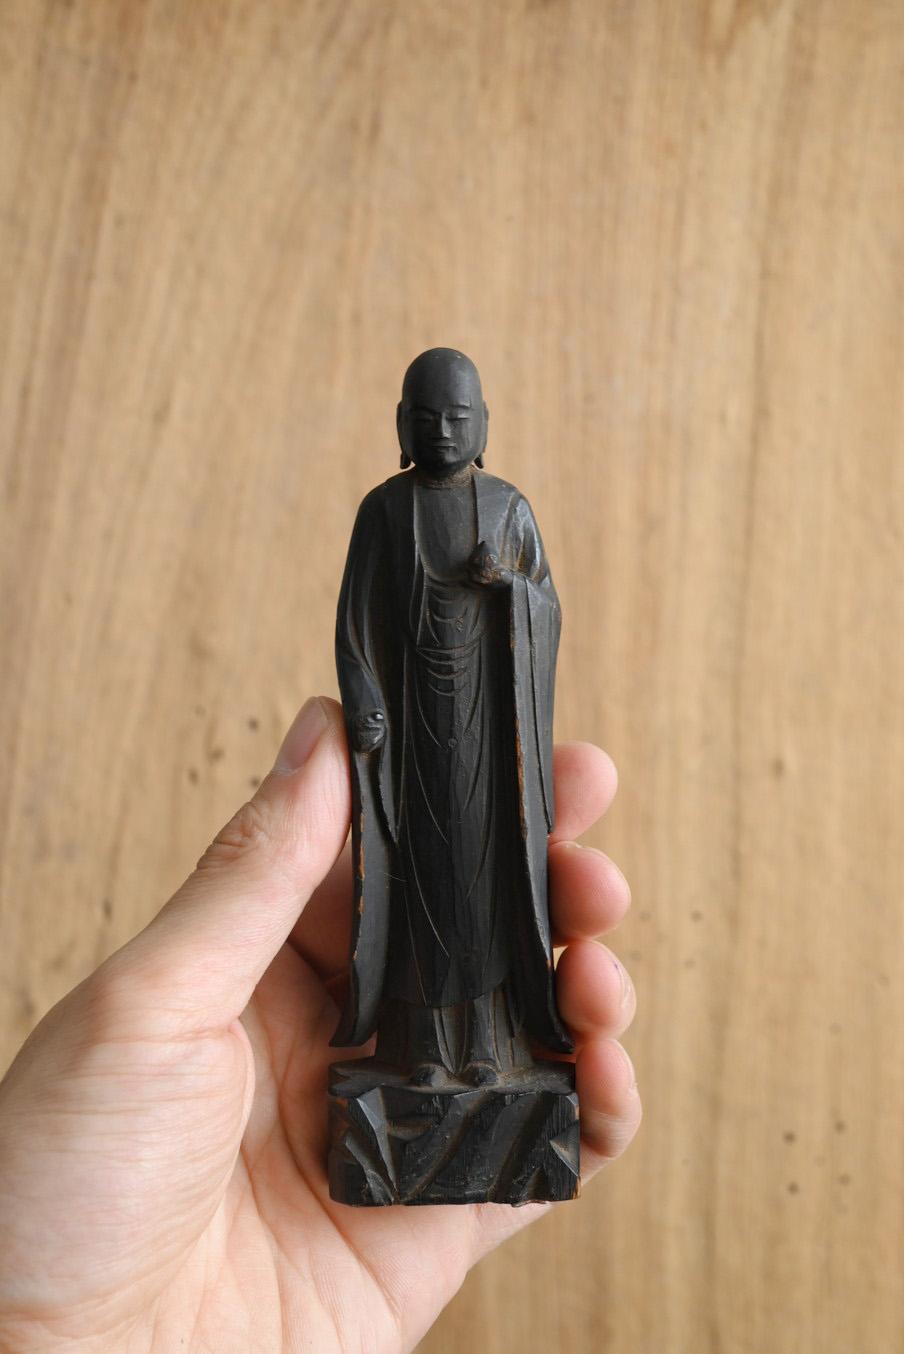 This is a wooden Buddha statue made in the late Edo period (1800s) in Japan.
The size is small enough to hold in one hand.
However, the carvings are carefully carved and the facial expressions and kimono expressions are beautiful.
The word 